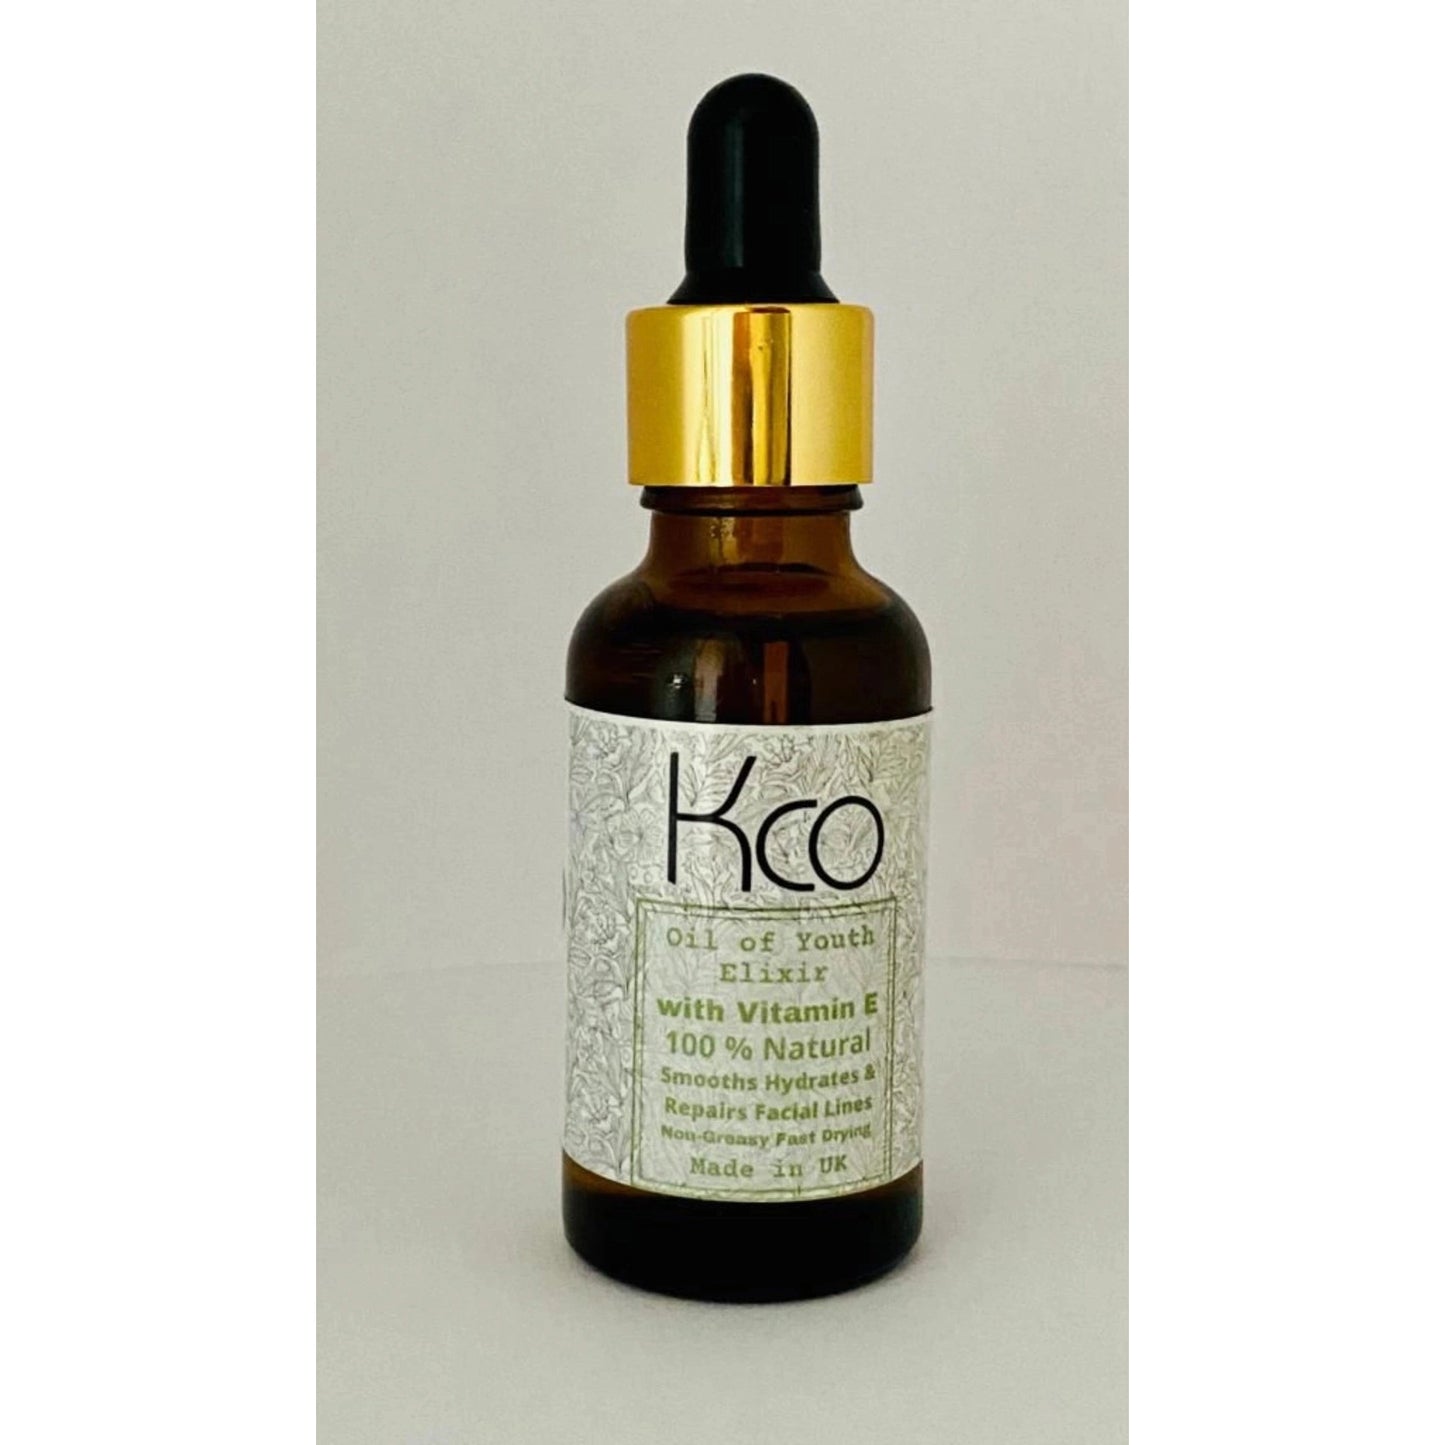 K Co Oil of Youth Elixir 100% Natural Face Oil with Vitamin E - Chemical Free Vegan